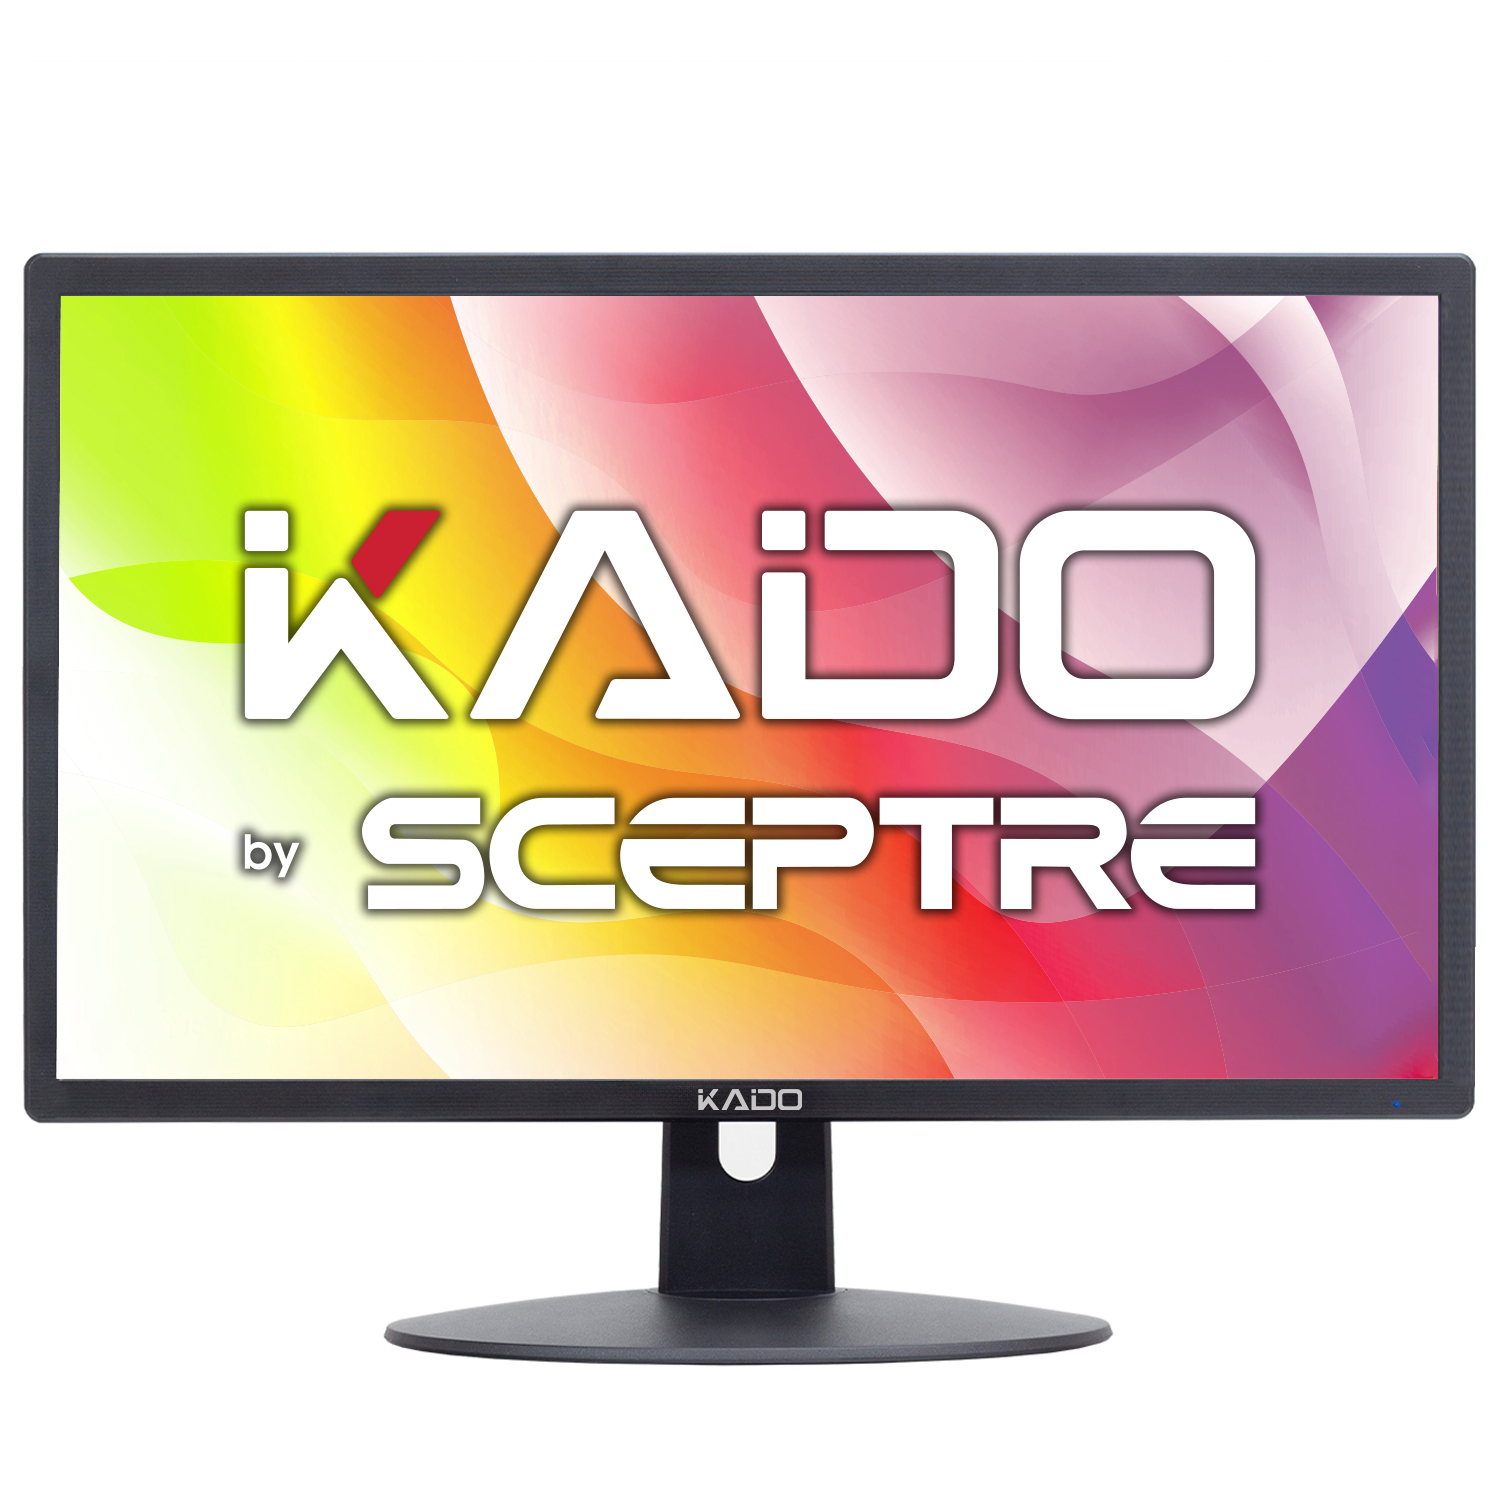 

Kado By Sceptre 22" Computer Monitor Gaming Office 1920x1080 Hd 75hz Vga Built-in Speakers Wall Mount Ready Black (e22 Series)